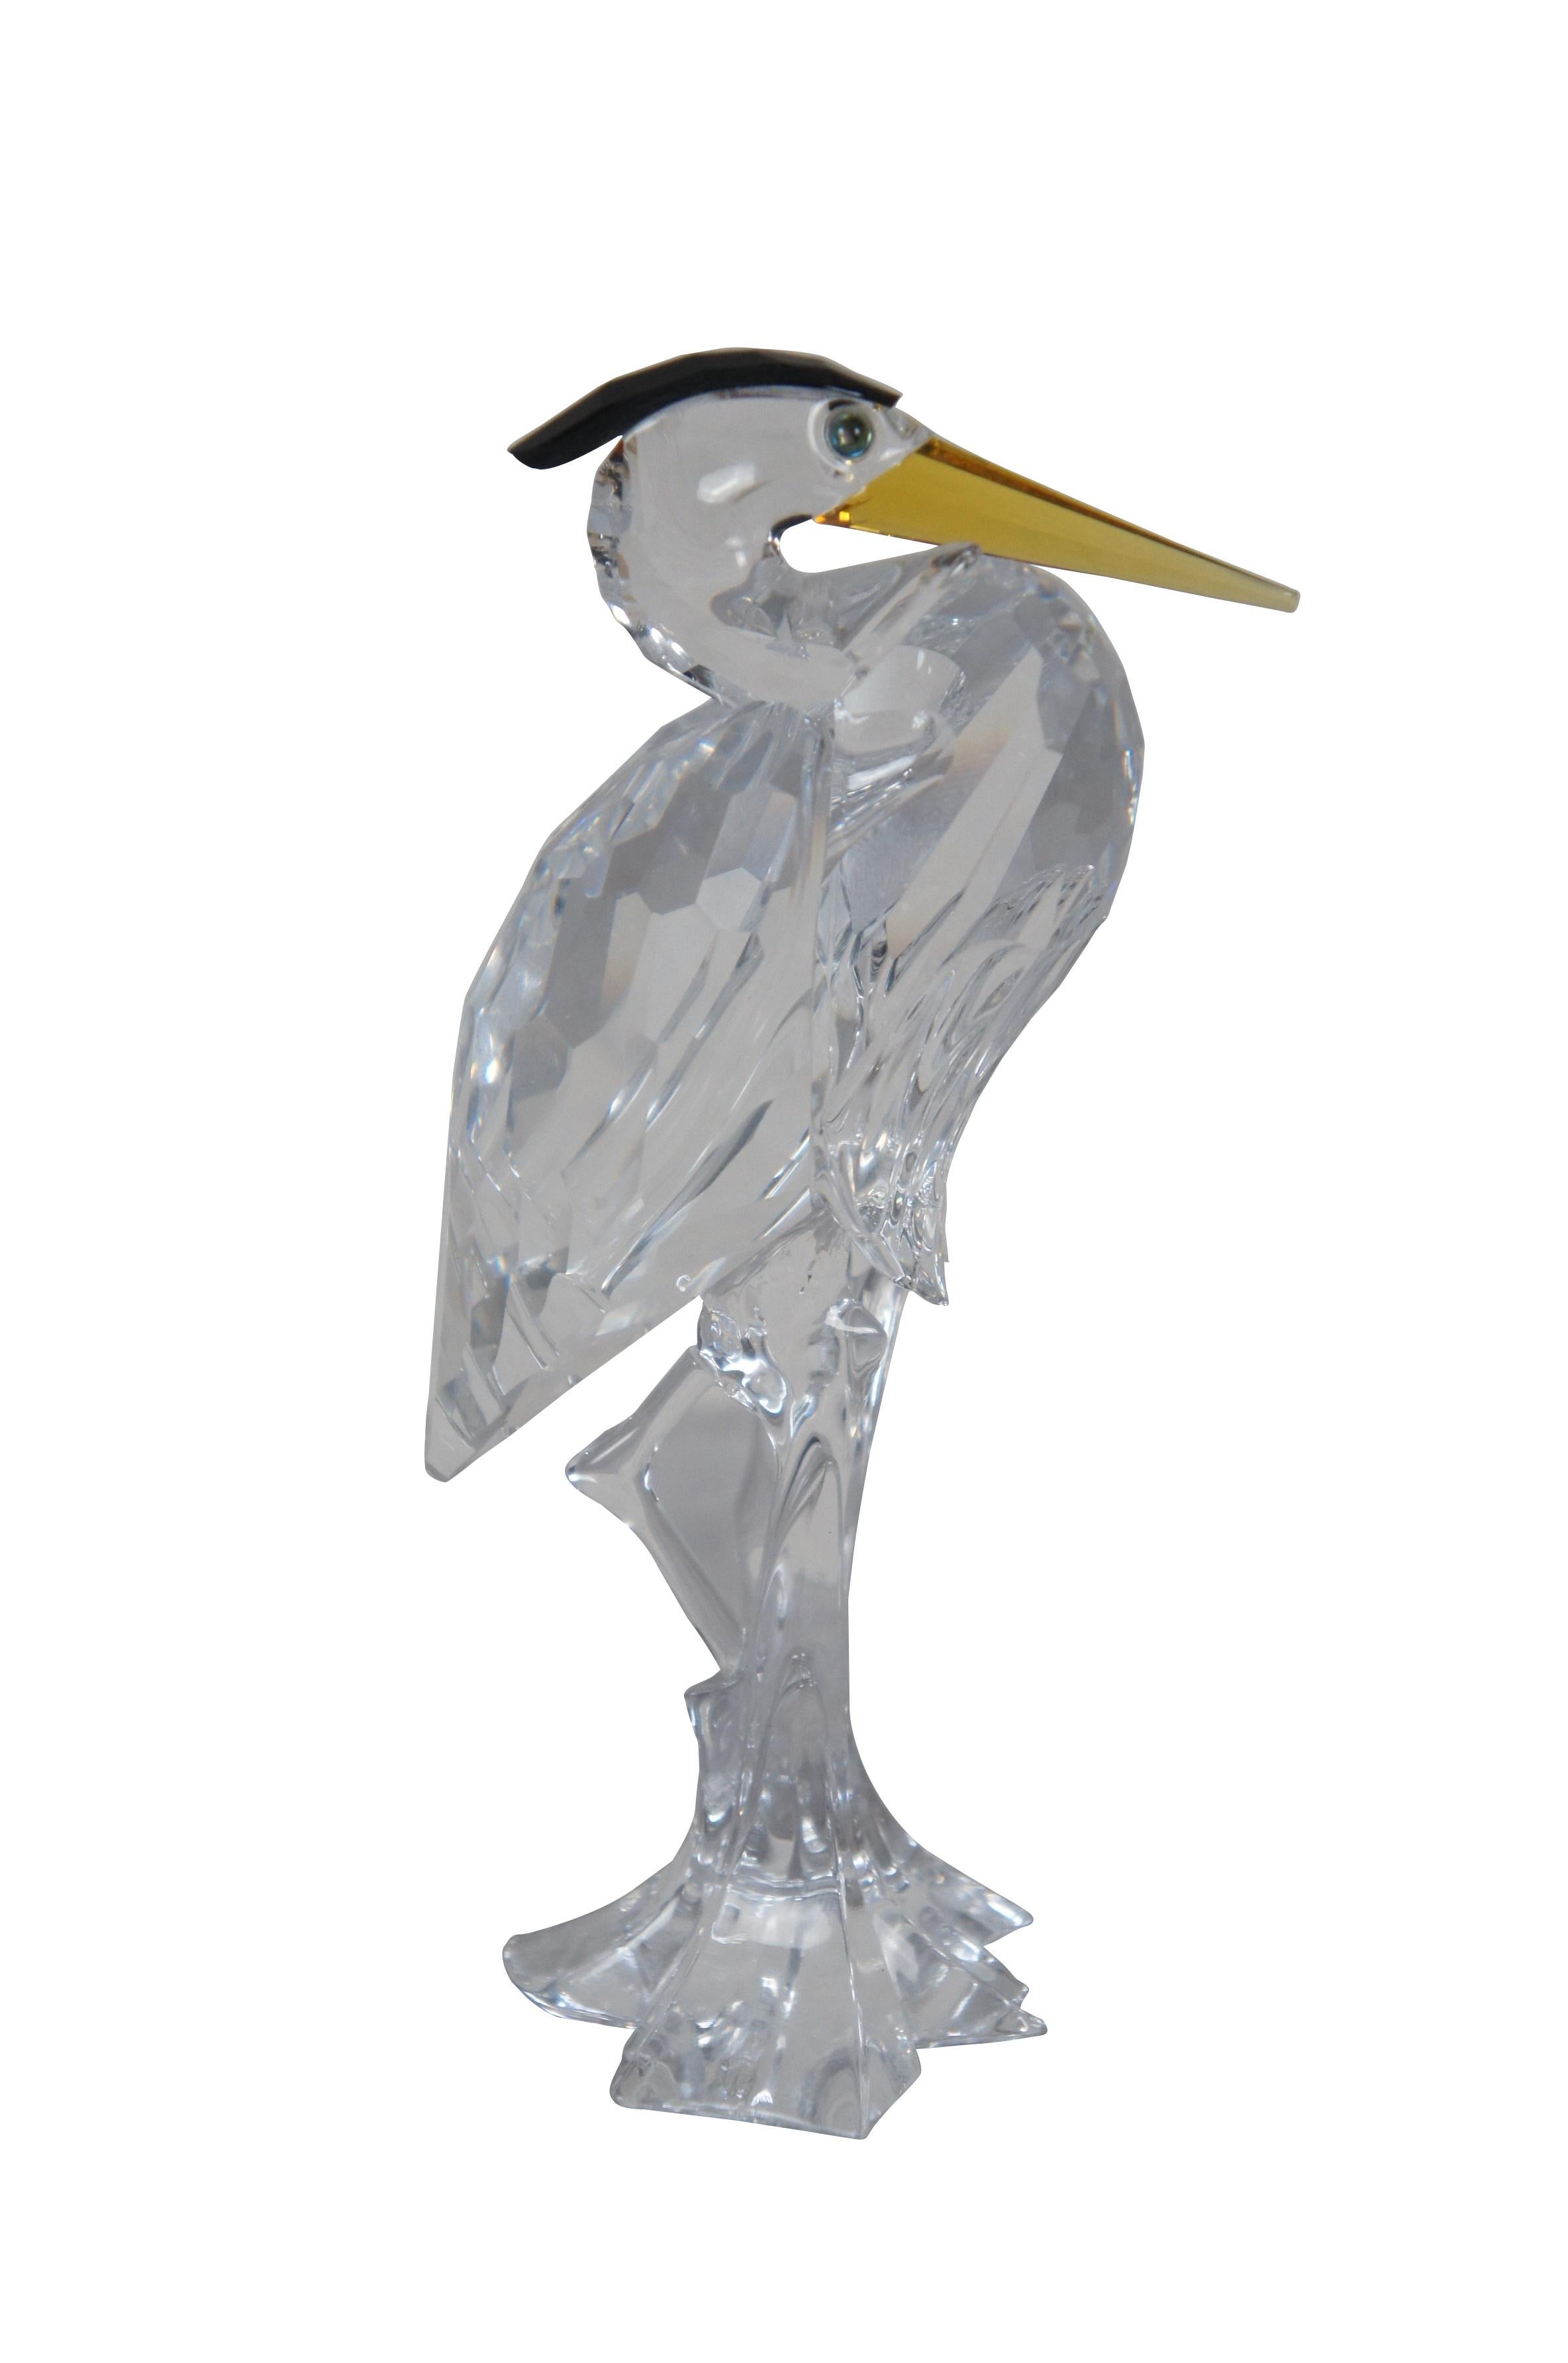 Vintage retired Swarovski Crystal figurine in the shape of a Silver Heron with black crest and yellow beak.

Dimensions:
2.75